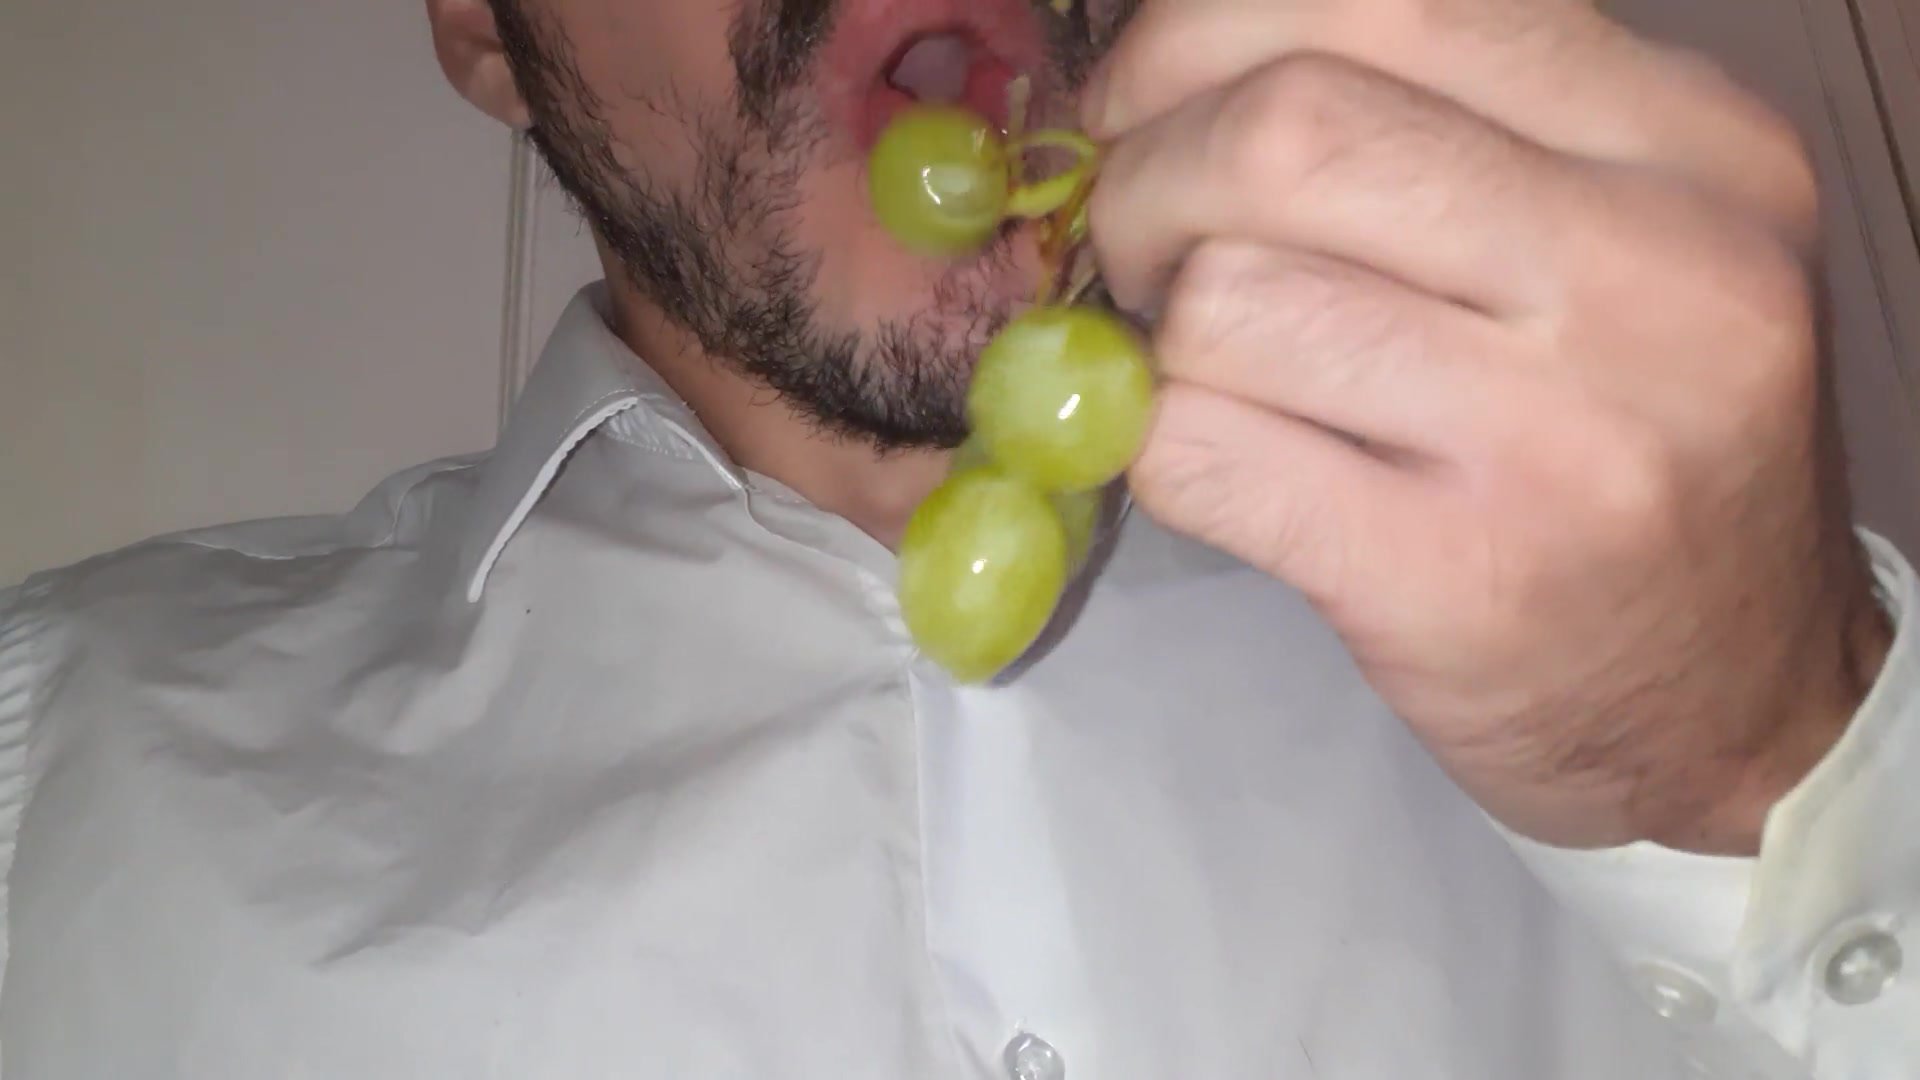 chewing grapes vore